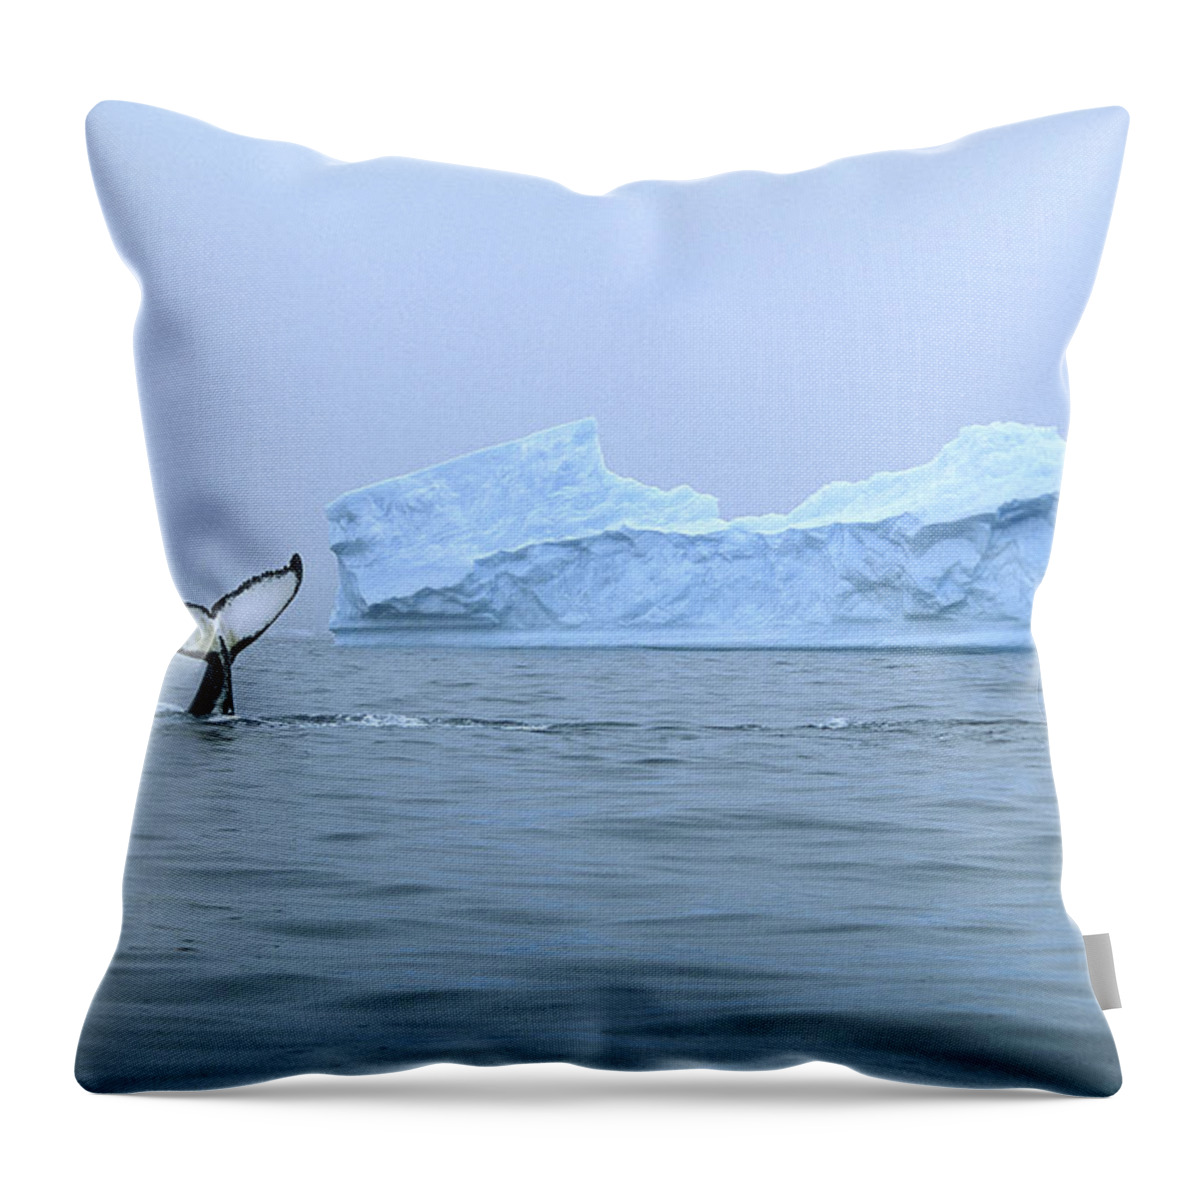 Feb0514 Throw Pillow featuring the photograph Humpback Whale Tail And Iceberg by Colin Monteath